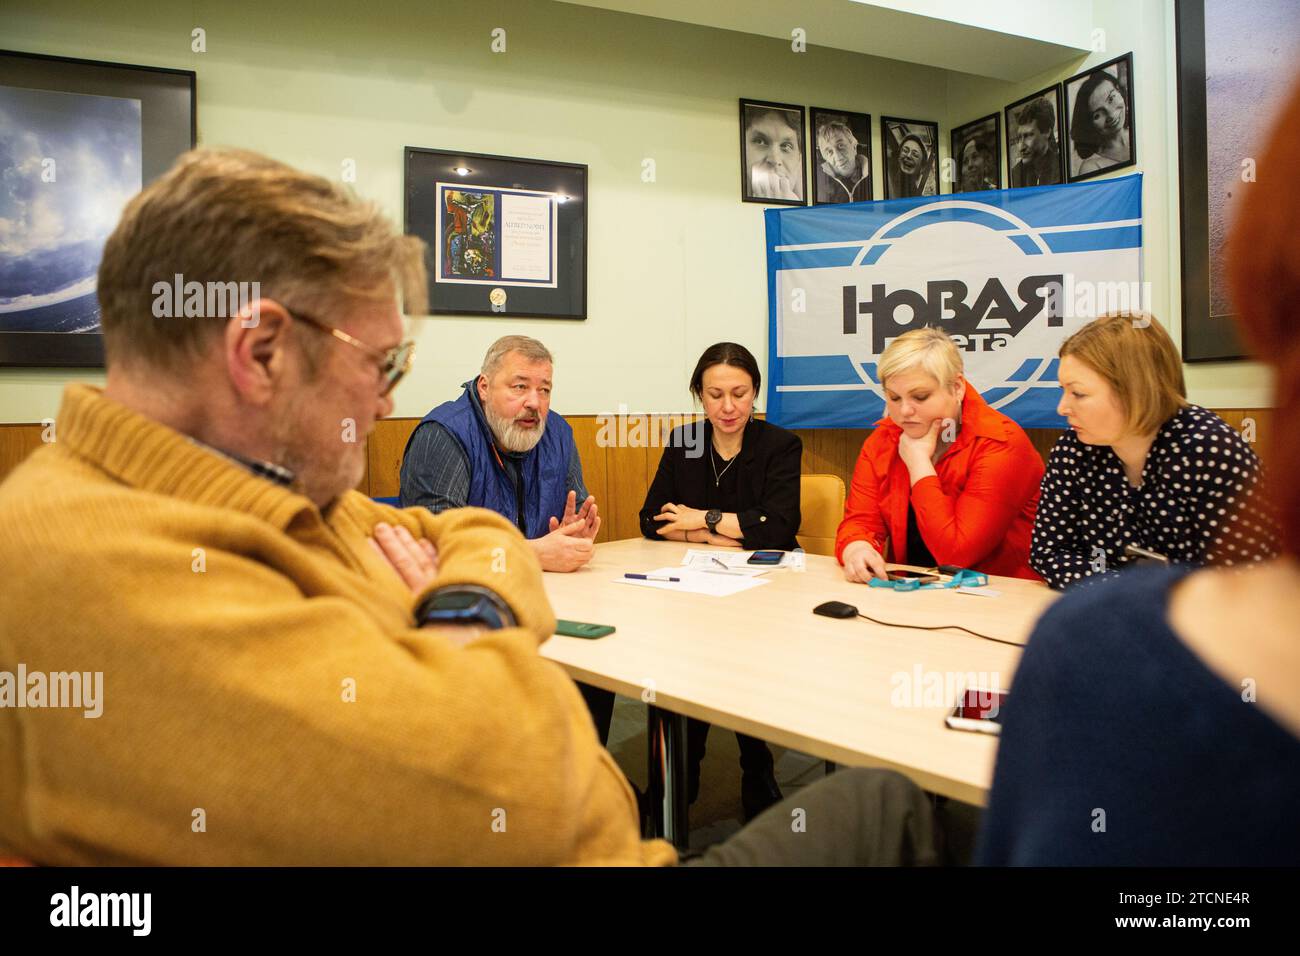 Moscow (Russia), 03/15/202. A day with the journalists of 'Novaya Gazeta', the newspaper led by the 2021 Nobel Peace Prize winner, Dmitri Muratov (with white hair and beard). Photo: Javier Nadales. ARCHDC. Credit: Album / Archivo ABC / Javier Nadales Carrera Stock Photo